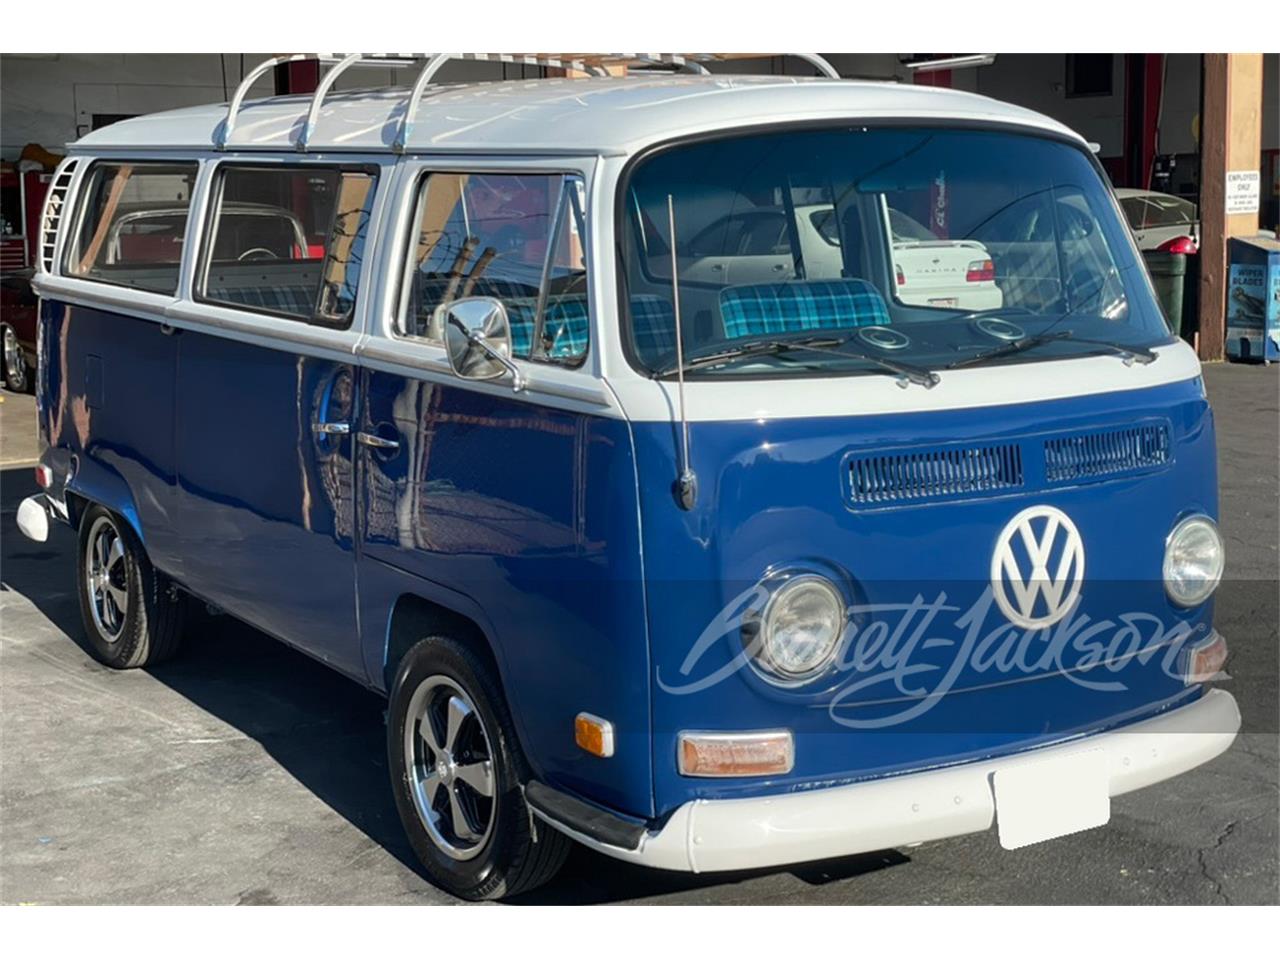 For Sale at Auction: 1971 Volkswagen Bus in Scottsdale, Arizona for sale in Scottsdale, AZ